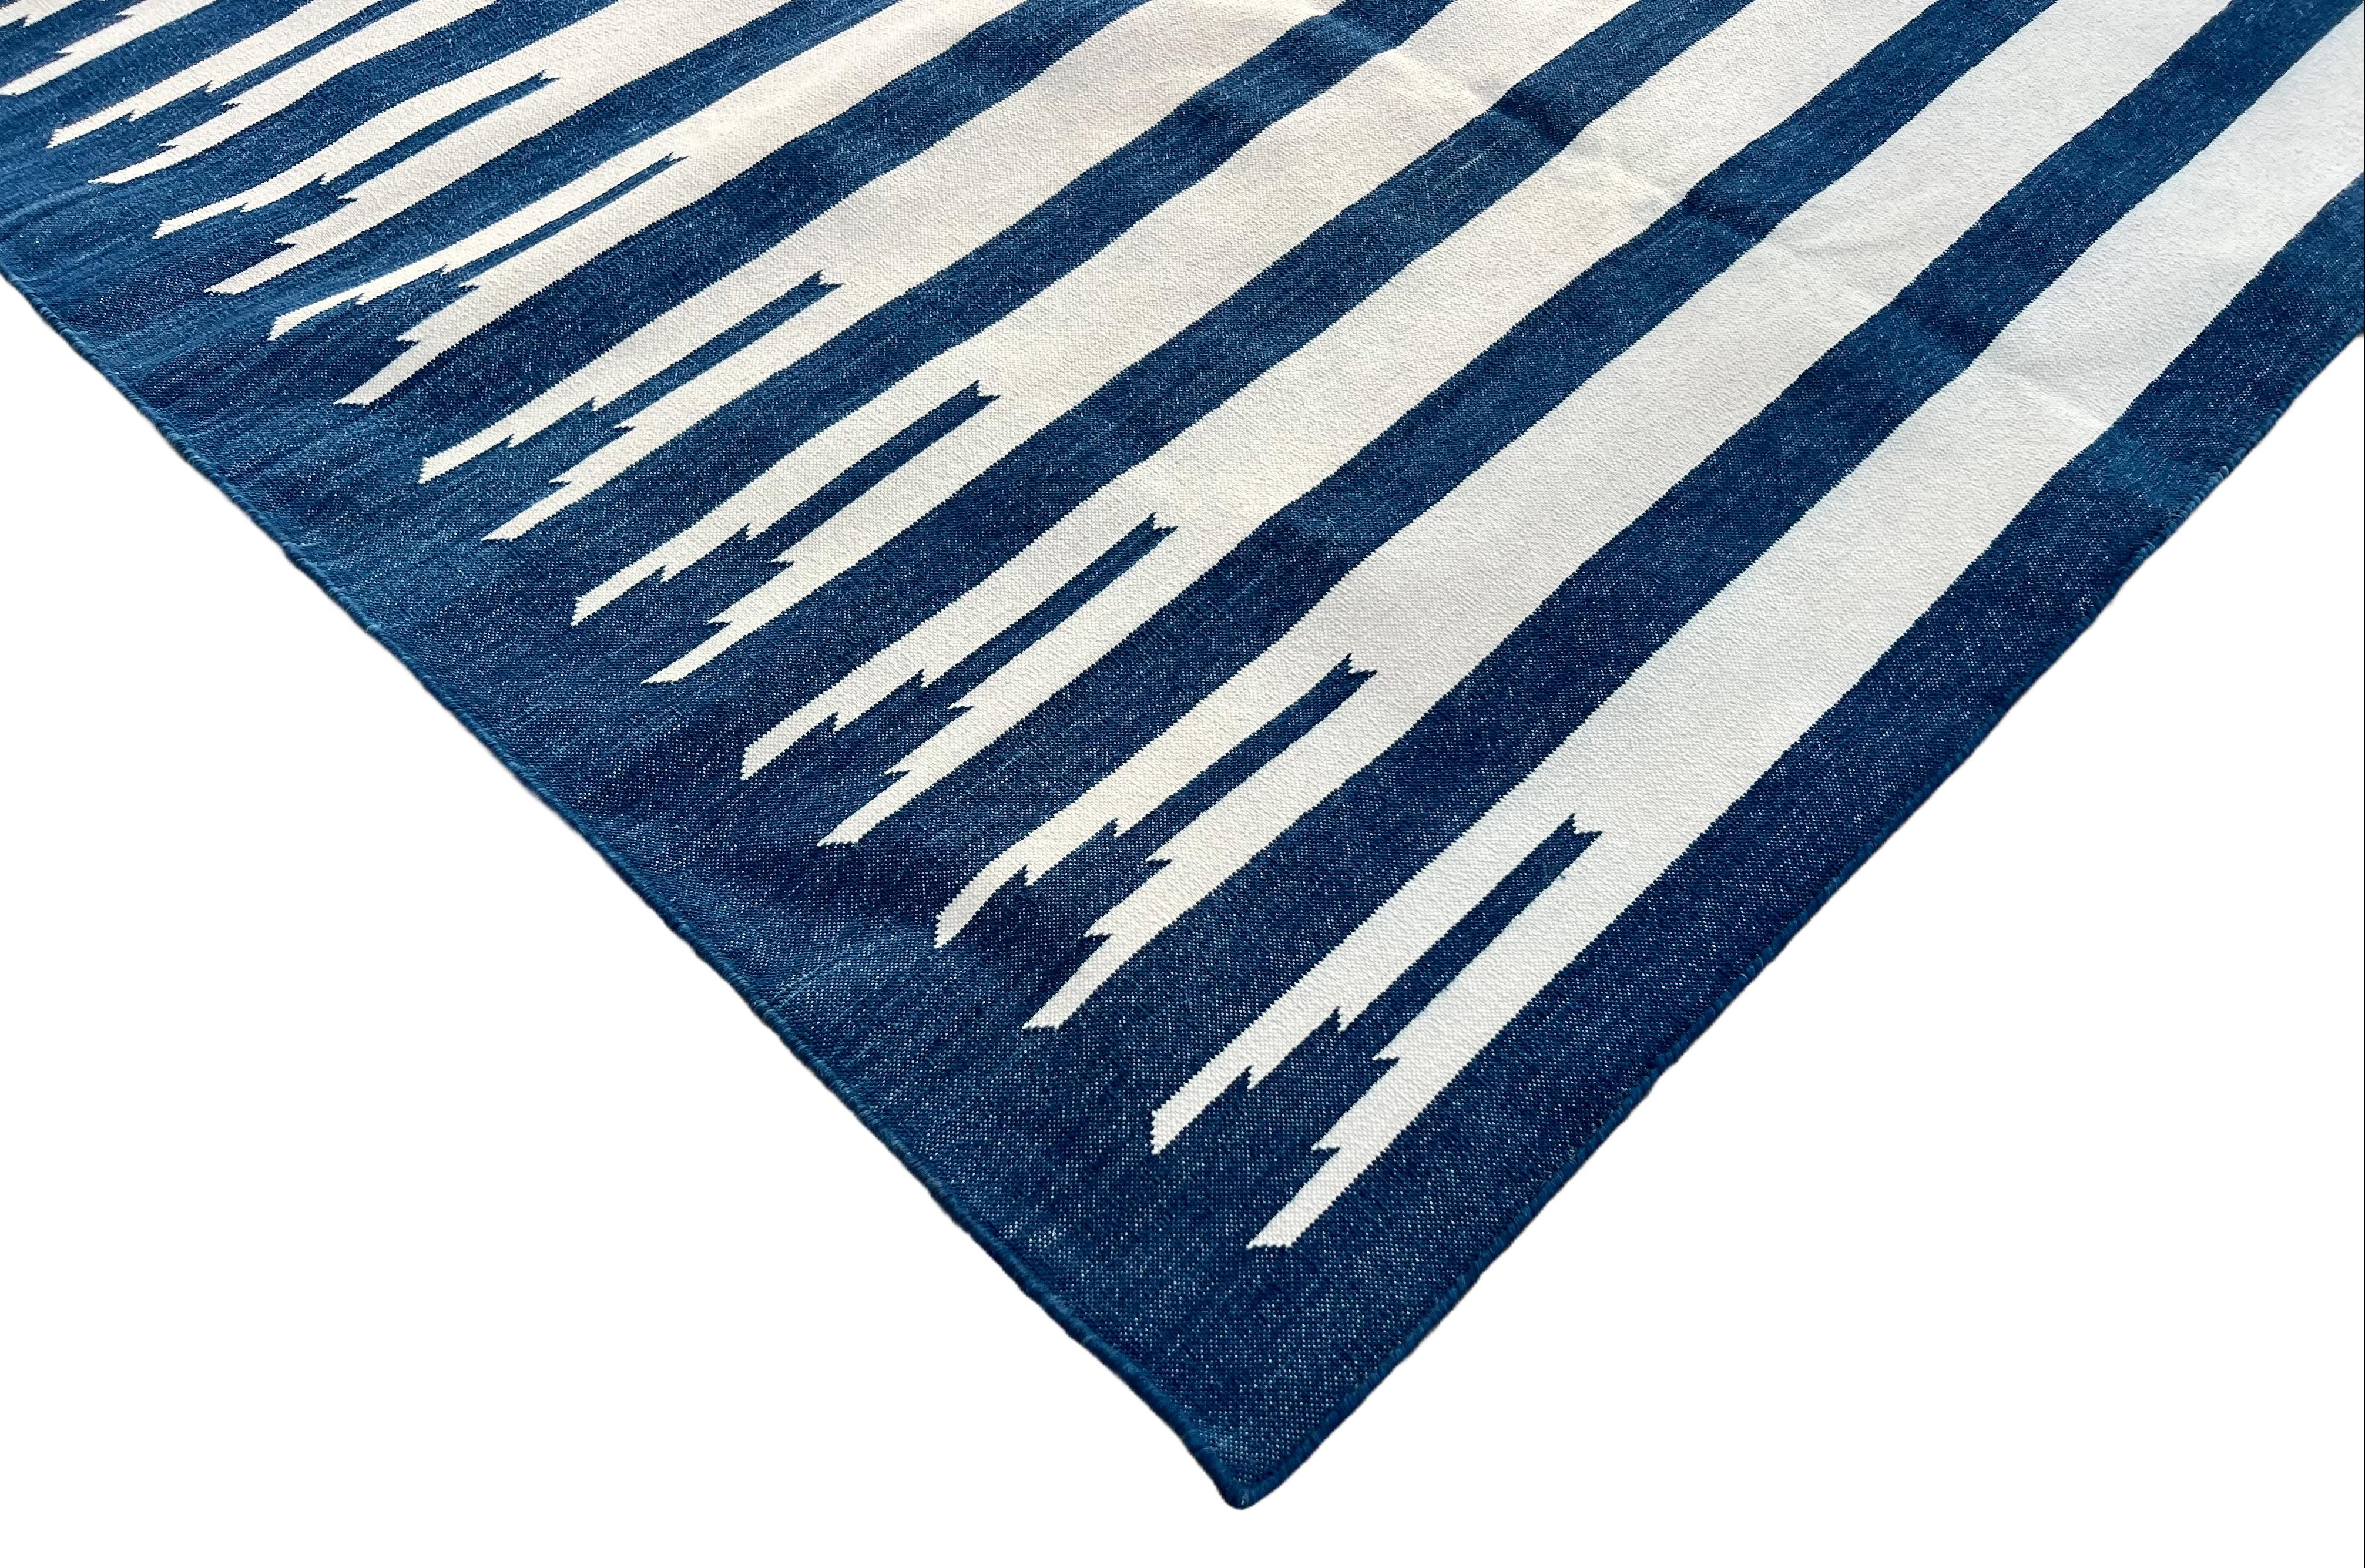 Cotton Vegetable Dyed Indigo Blue And White Striped Indian Dhurrie Rug- 8'x10' (240x300cm) 

These special flat-weave dhurries are hand-woven with 15 ply 100% cotton yarn. Due to the special manufacturing techniques used to create our rugs, the size